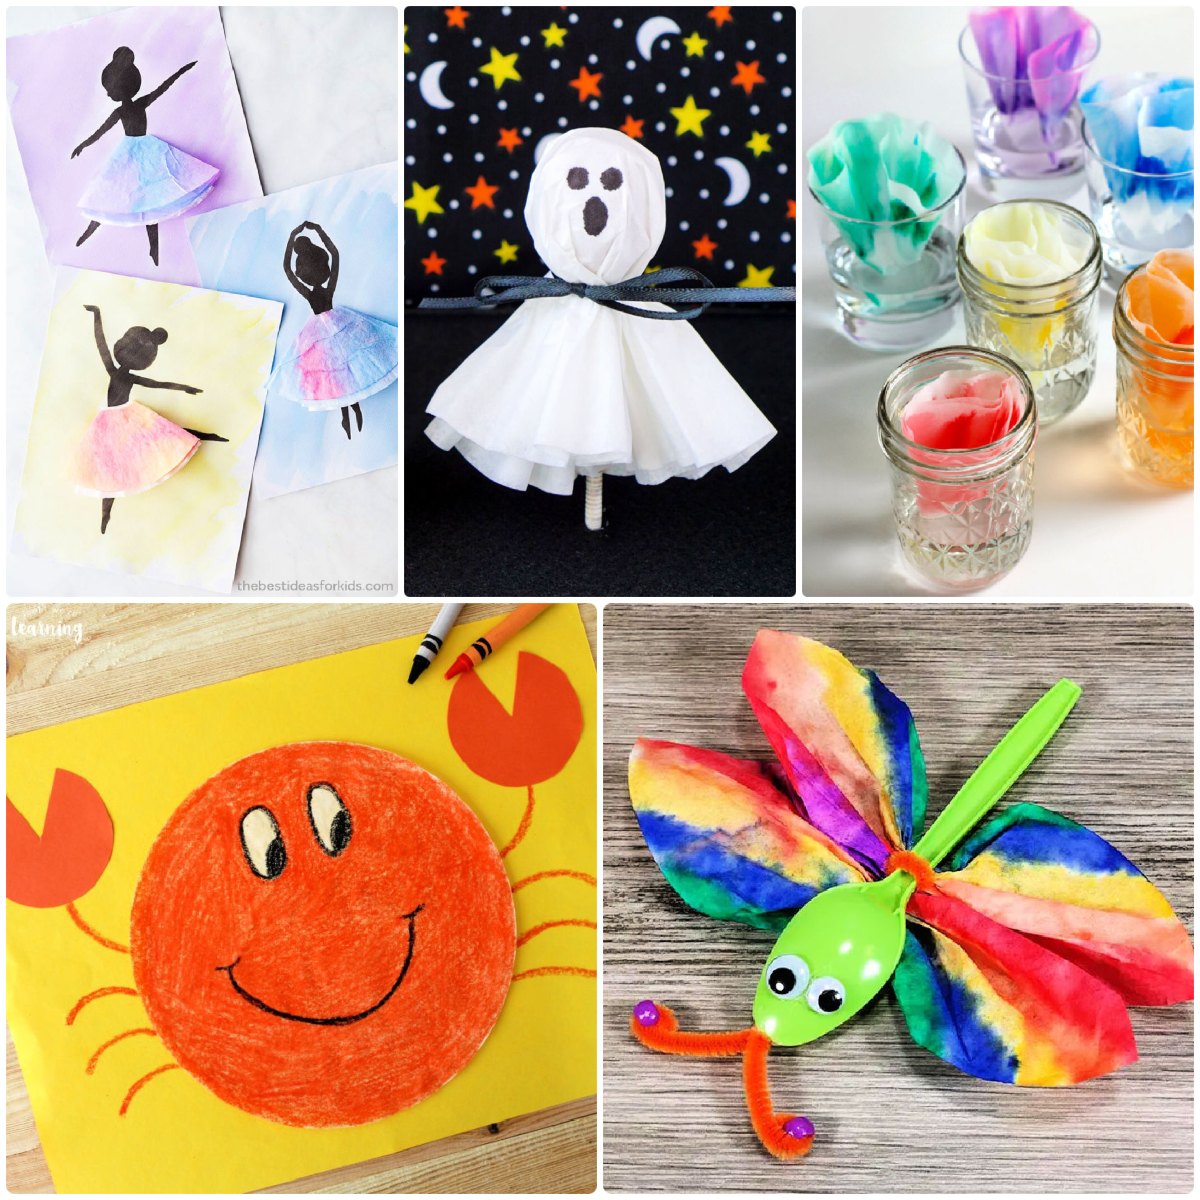 25 Easy Coffee Filter Crafts and Art Projects - Craftulate